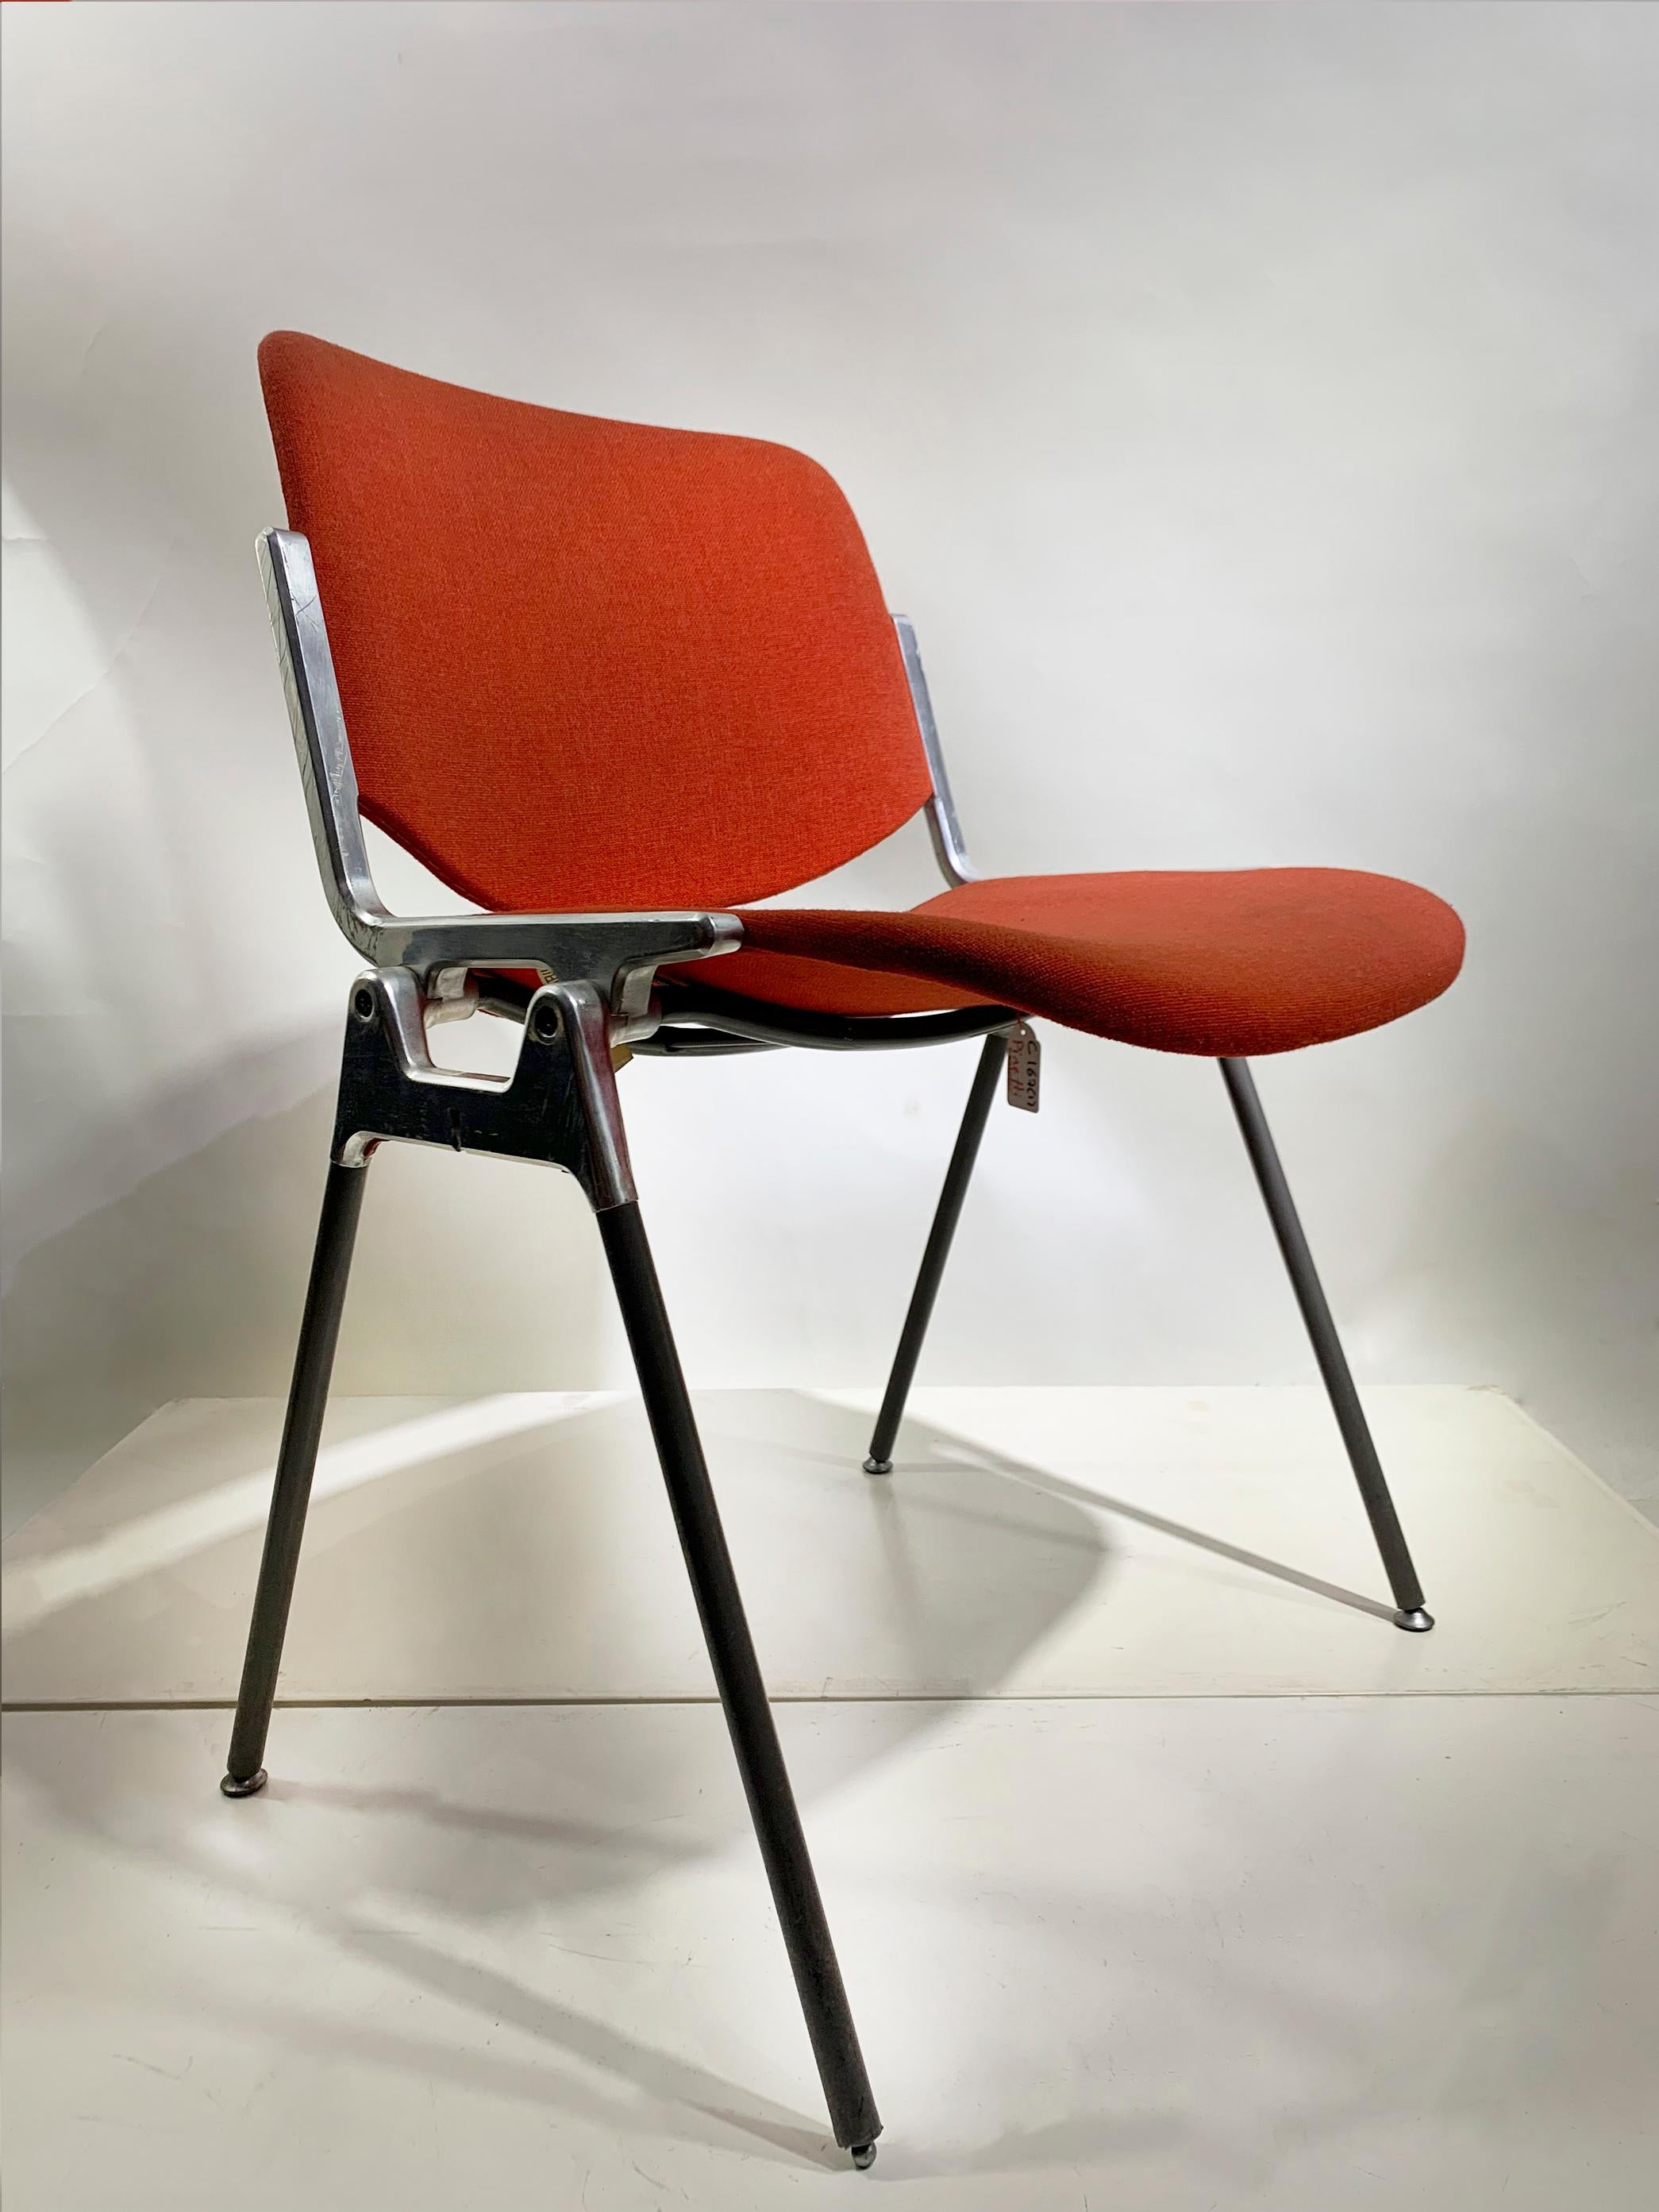 DSC 106 is one of the most famous chairs of the Castelli brand. Designed by Giancarlo Piretti, it is still an object with an innovative and fascinating design.

The elegant interweaving of lines that define the shapes of dsc 106 has been admired by